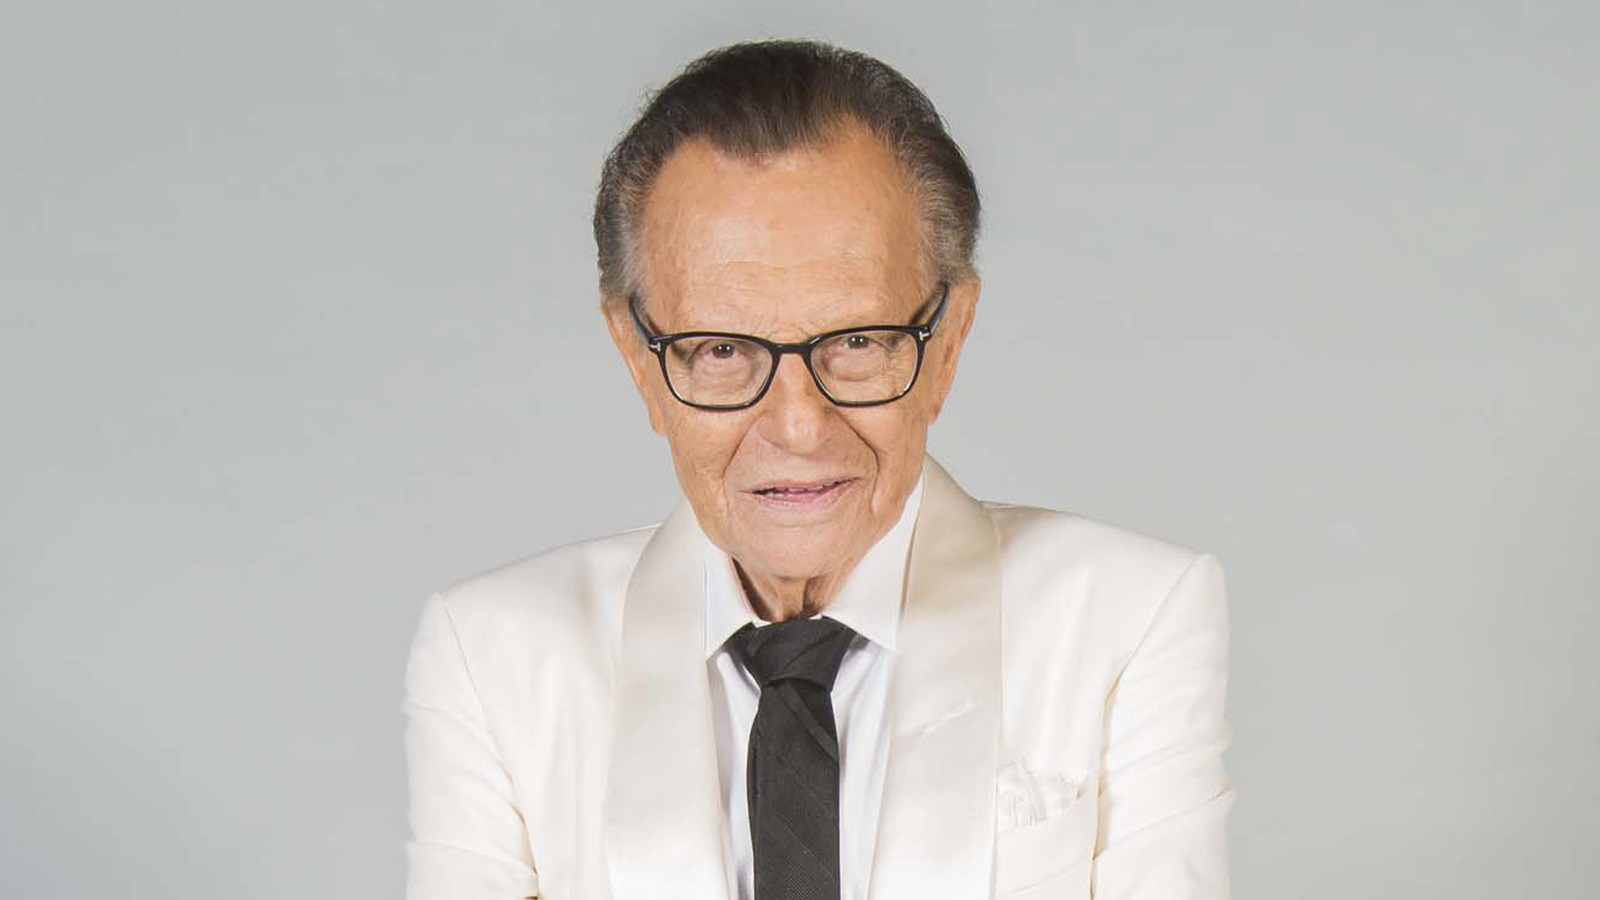 The Unsaid Truth About Larry King's COVID-19 Risk Factors